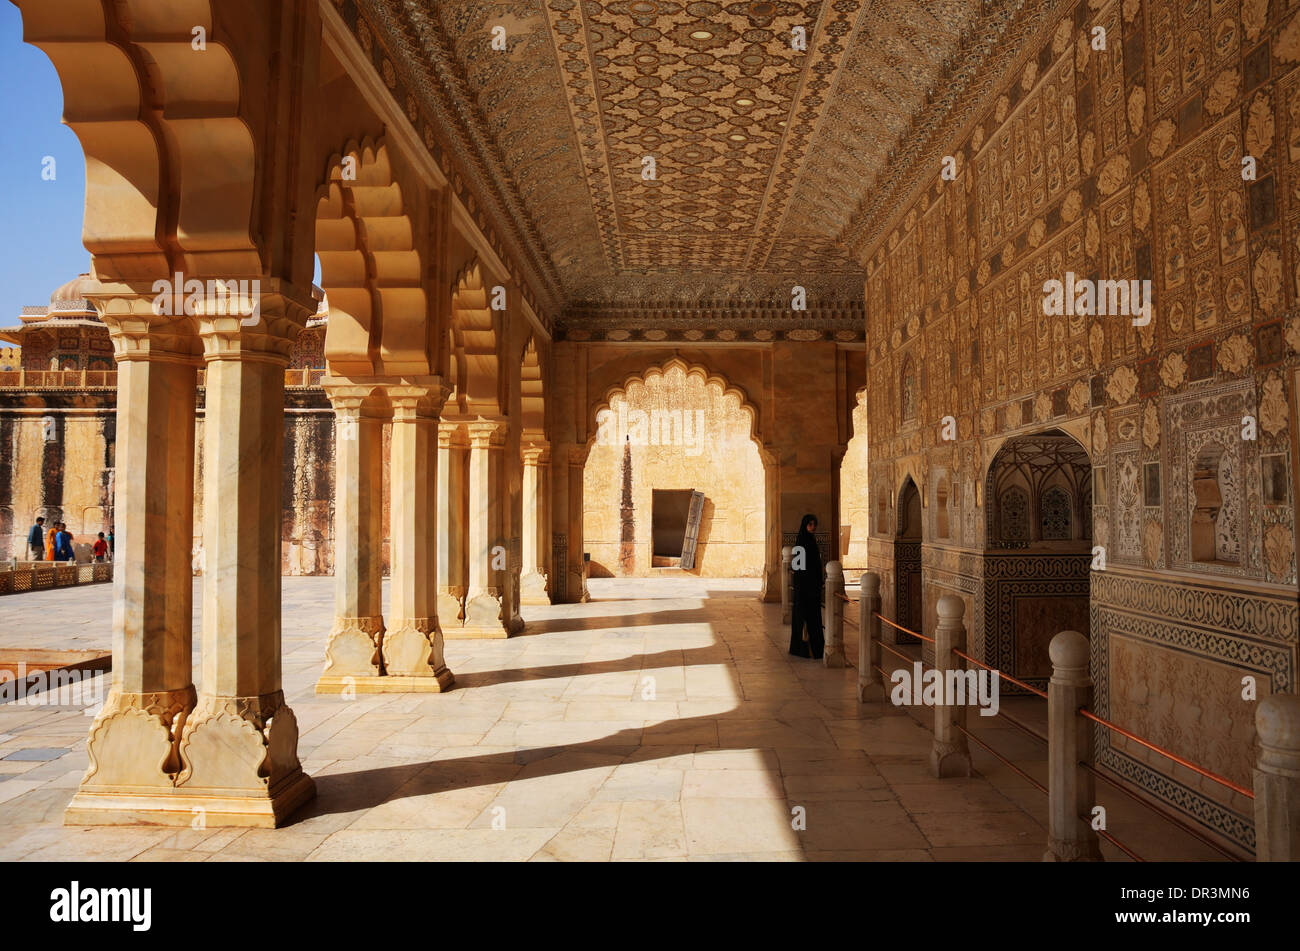 Sheesh Mahal, The Palace of Mirrors in the Amber Fort Jaipur, Rajasthan, India Stock Photo